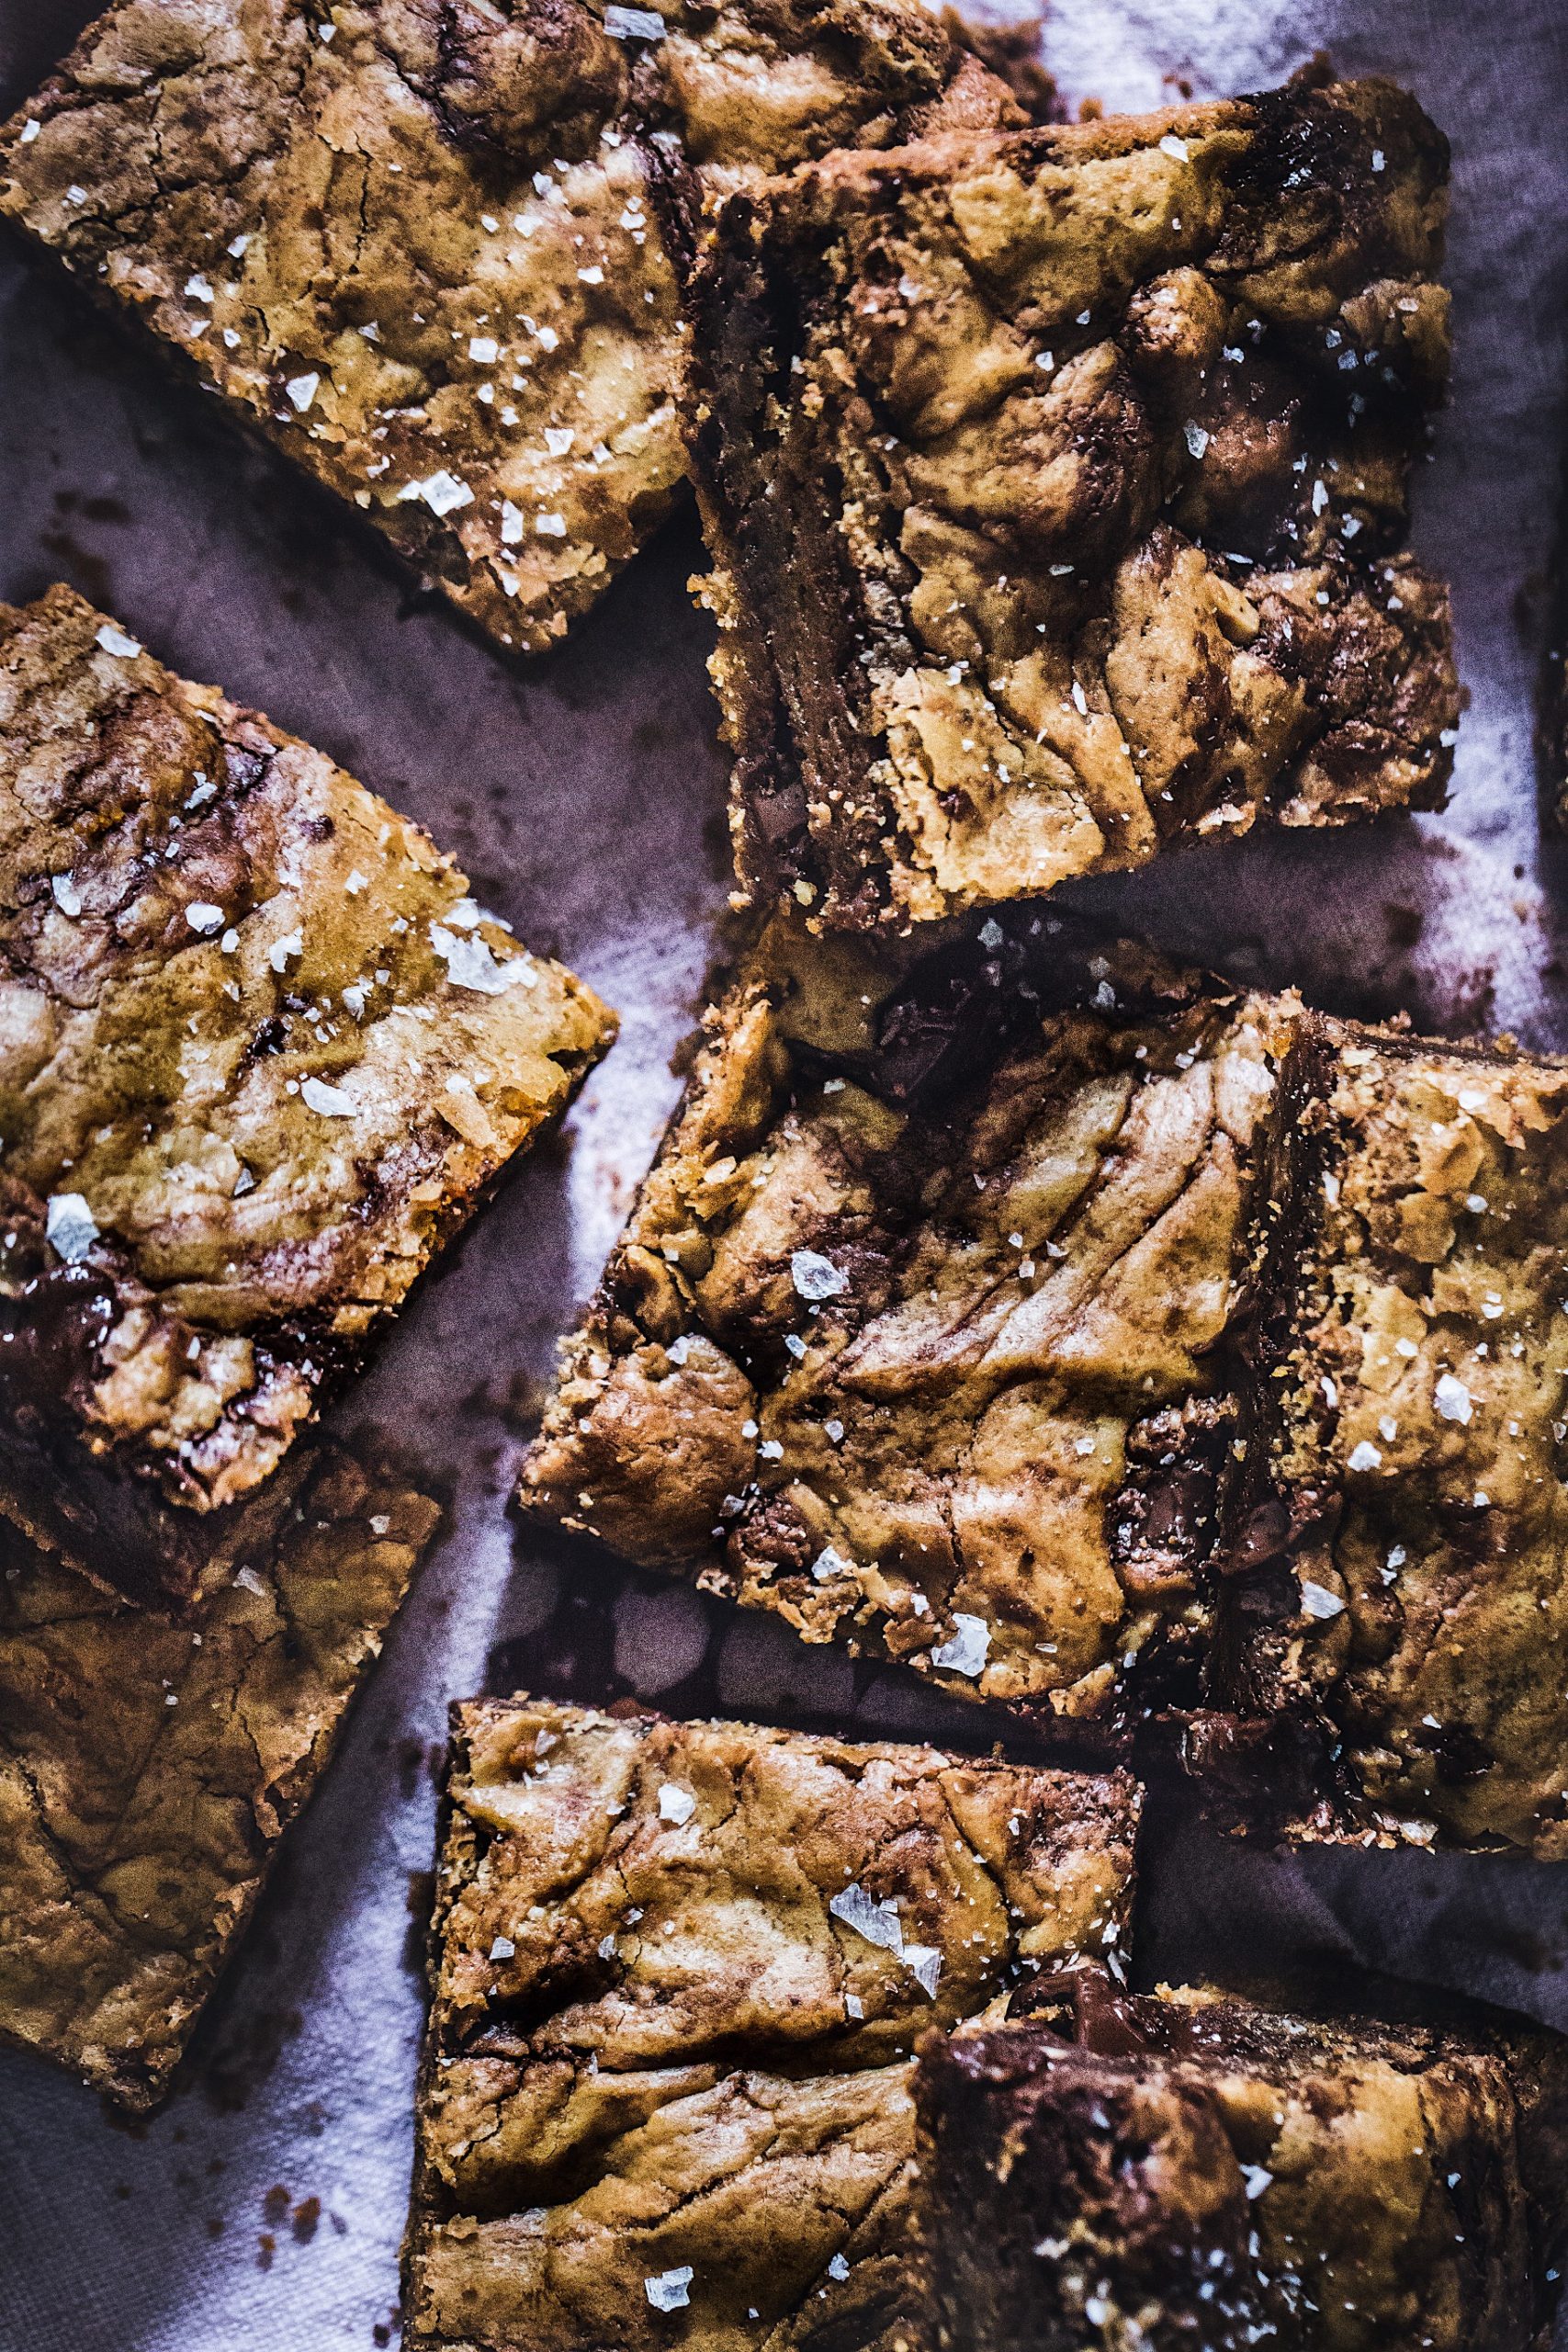 Brunettes, or The Ultimate Blondie Recipe